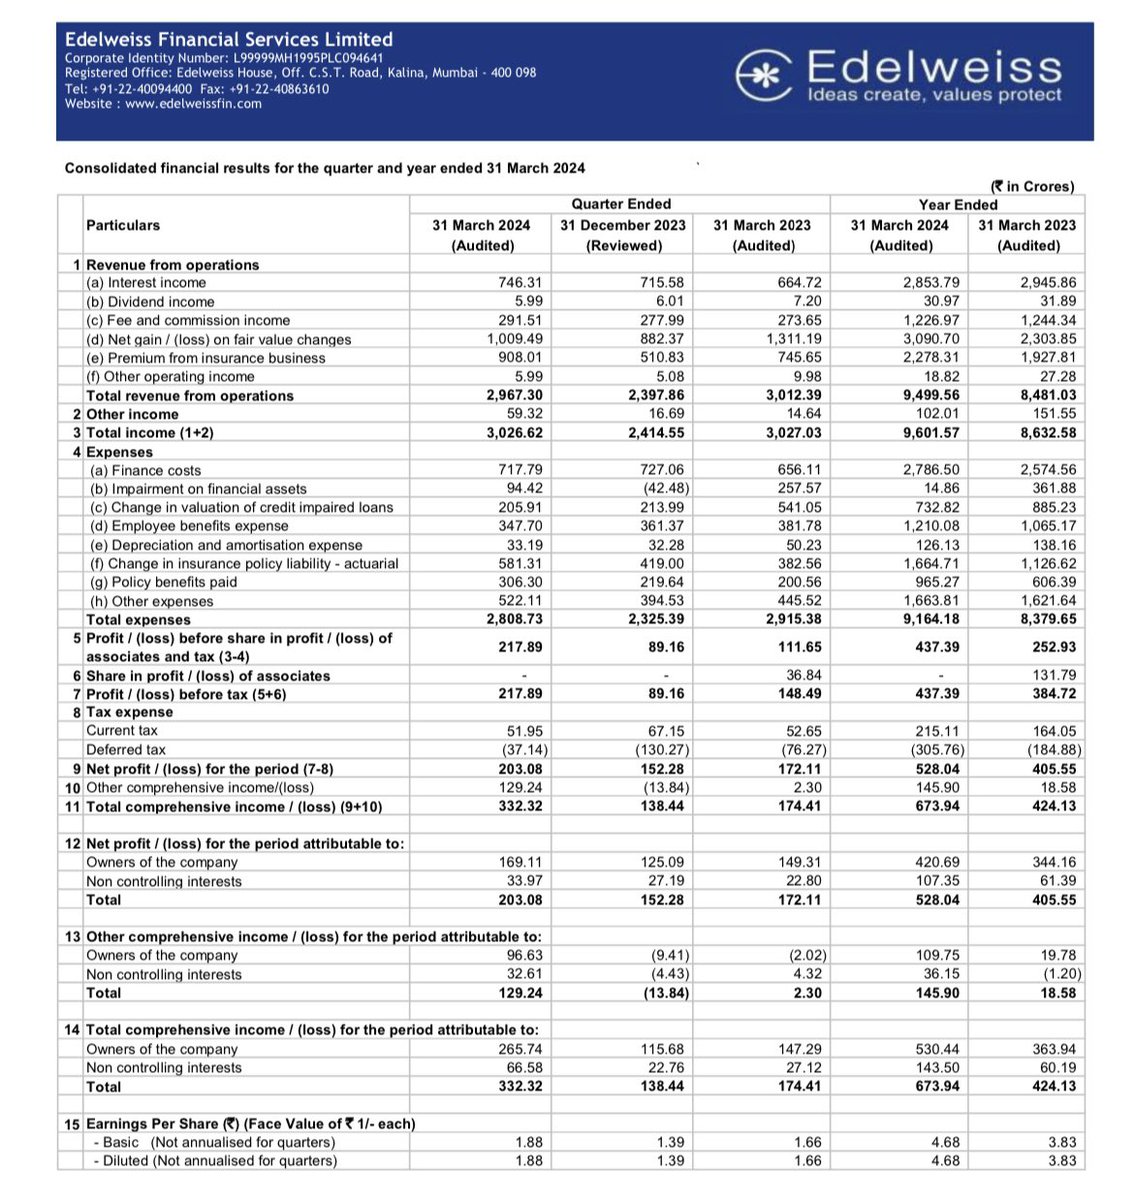 EXCELLENT Q4FY24 RESULT HAS BEEN REPORTED BY EDELWEISS FINANCIAL SERVICES ✅✅✅

Q4FY24 Net Profit Of 203 CR 
VS 
Q3FY24 Net Profit Of 152 CR 
VS 
Q4FY23 Net Profit Of 172 CR 

Net profit growth of 33.5% QOQ & 18% YOY 
Valuation wise attractive at a forward PE of just 8.8